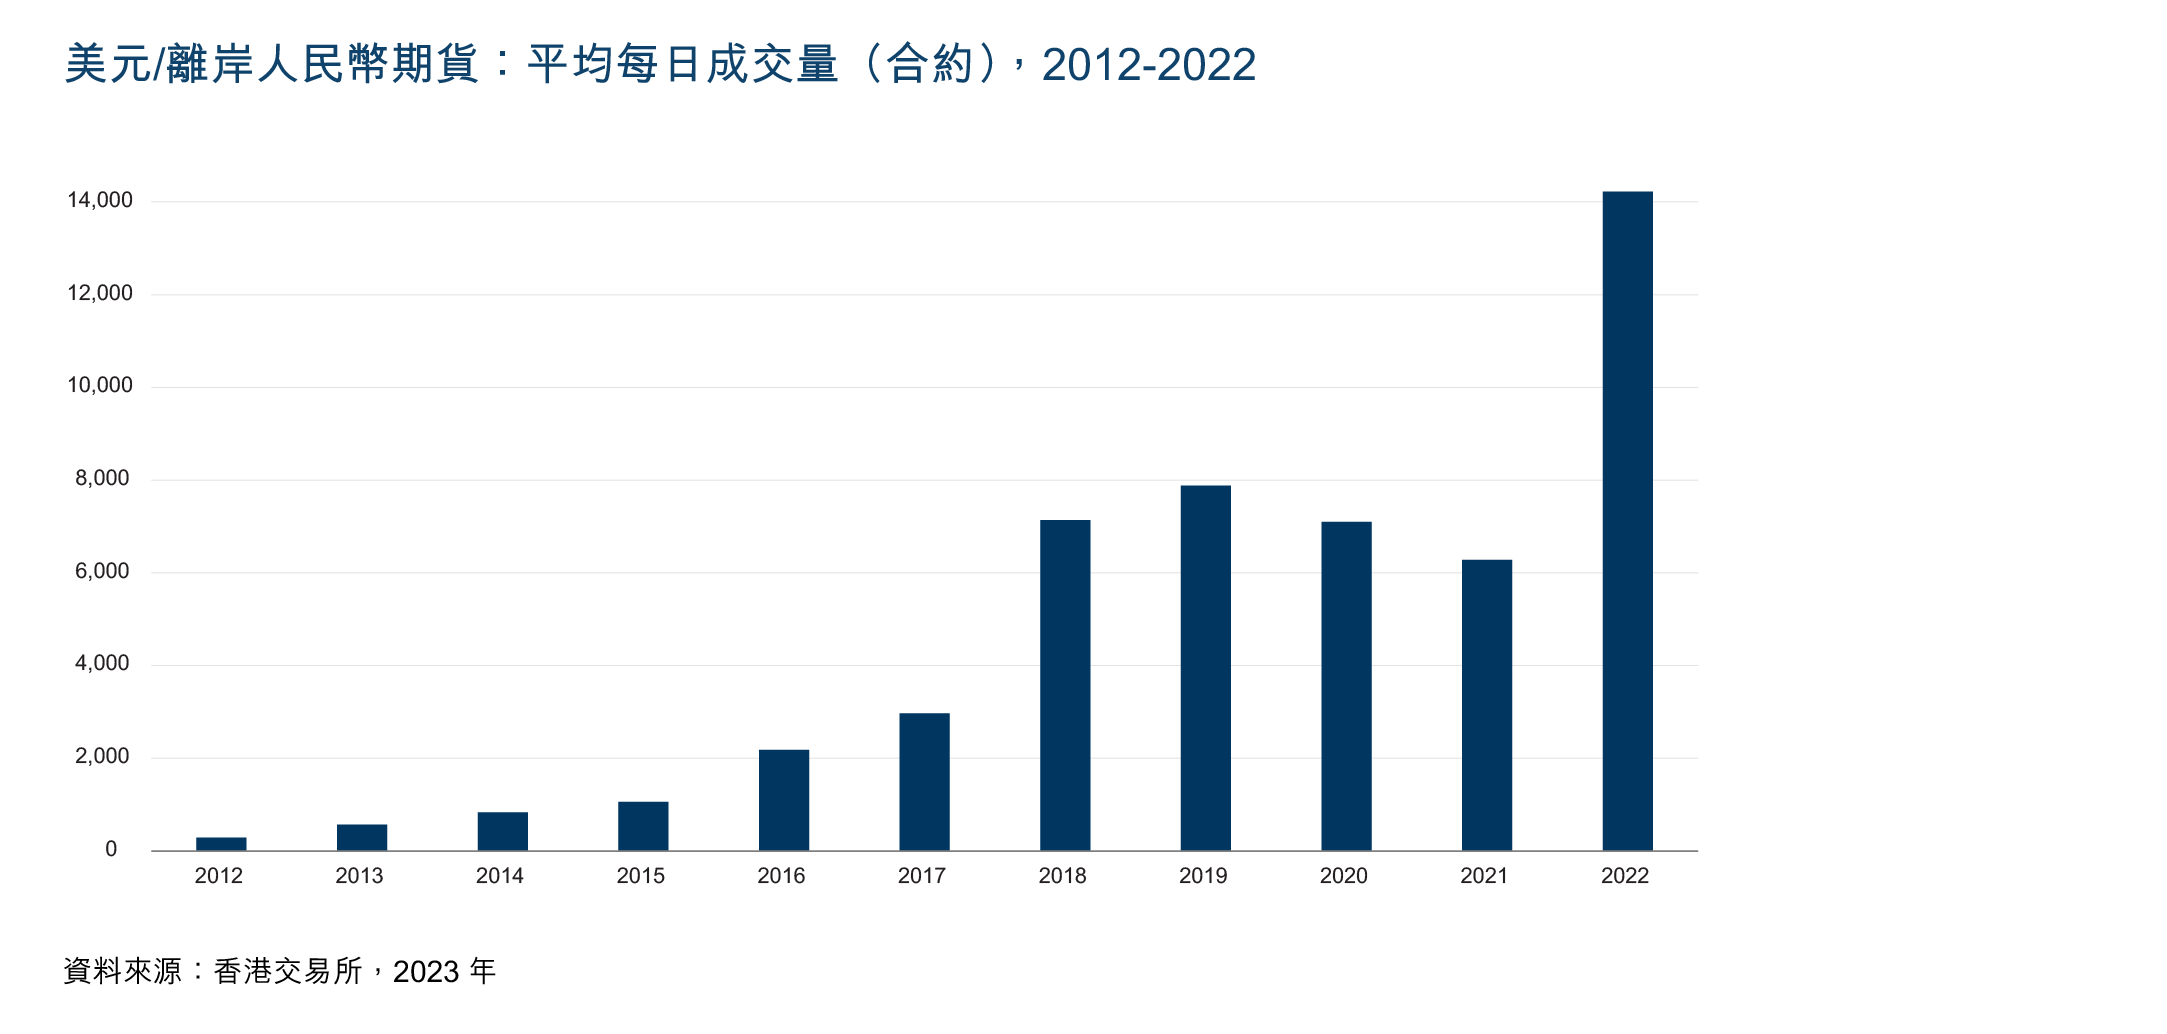 Chart showing average daily contract volume for USD/CNH Futures at HKEX from 2012 to 2022